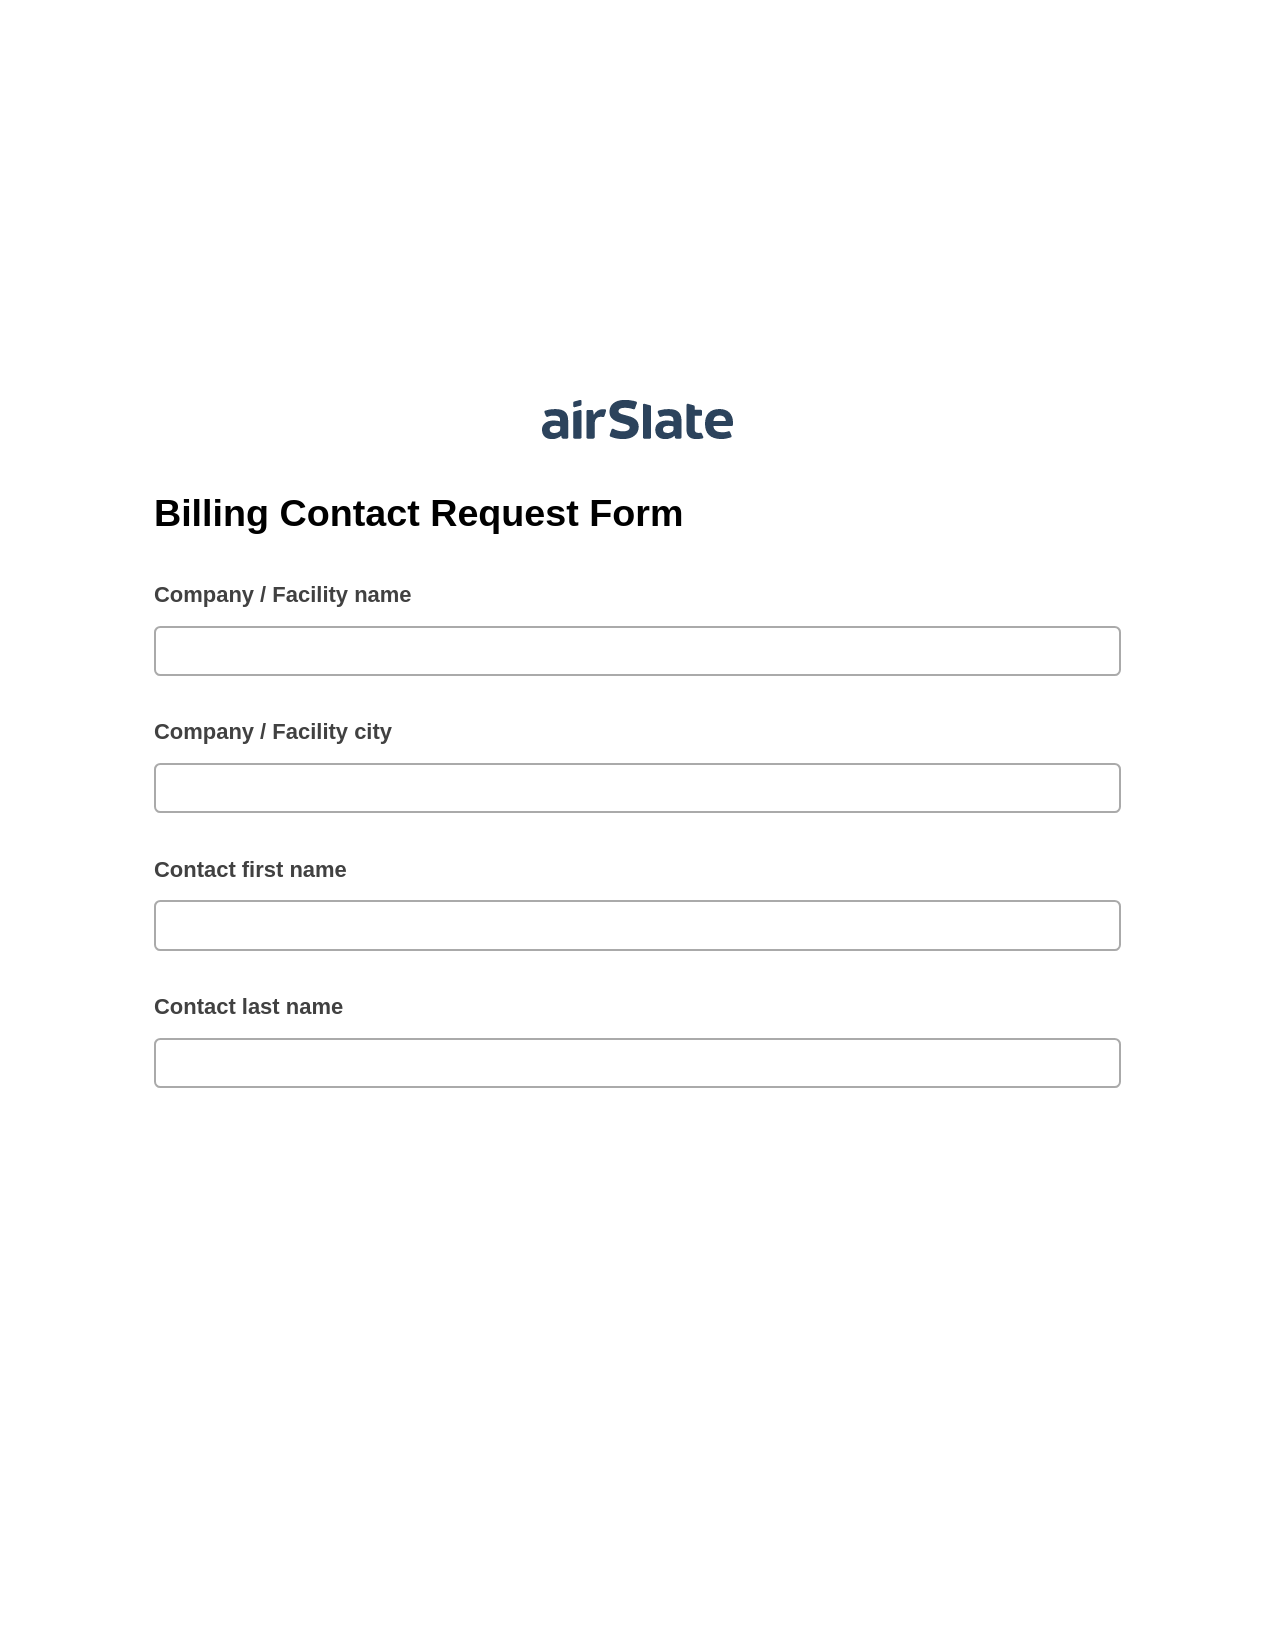 Billing Contact Request Form Pre-fill Dropdown from Airtable, SendGrid send Campaign bot, Export to MySQL Bot